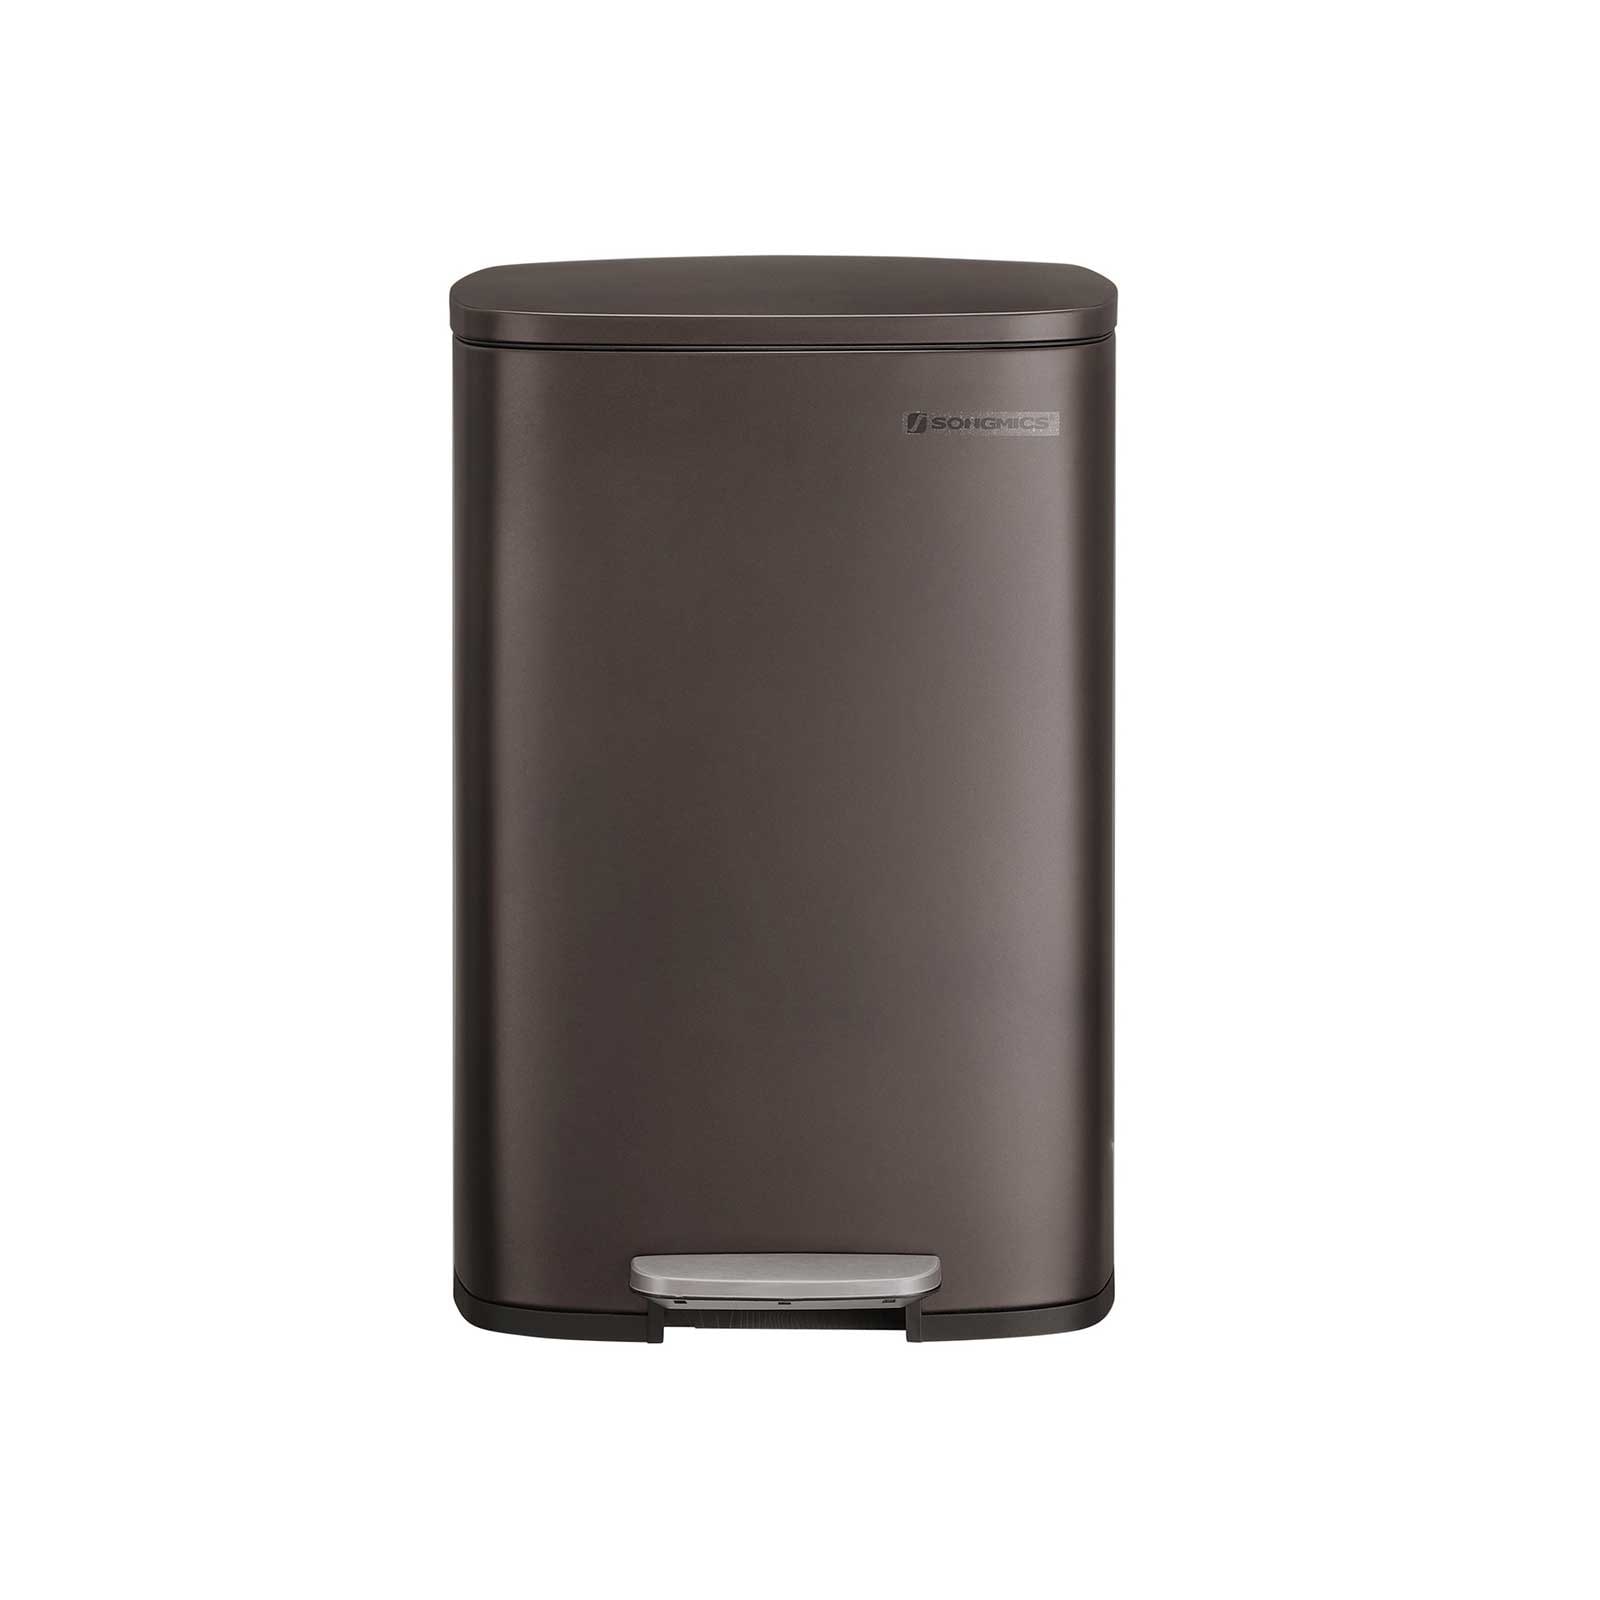 https://ak1.ostkcdn.com/images/products/is/images/direct/12406e97878e0afc968f5372702d4f88aa2433e9/Brown-Step-Open-Trash-Can-for-Kitchen.jpg